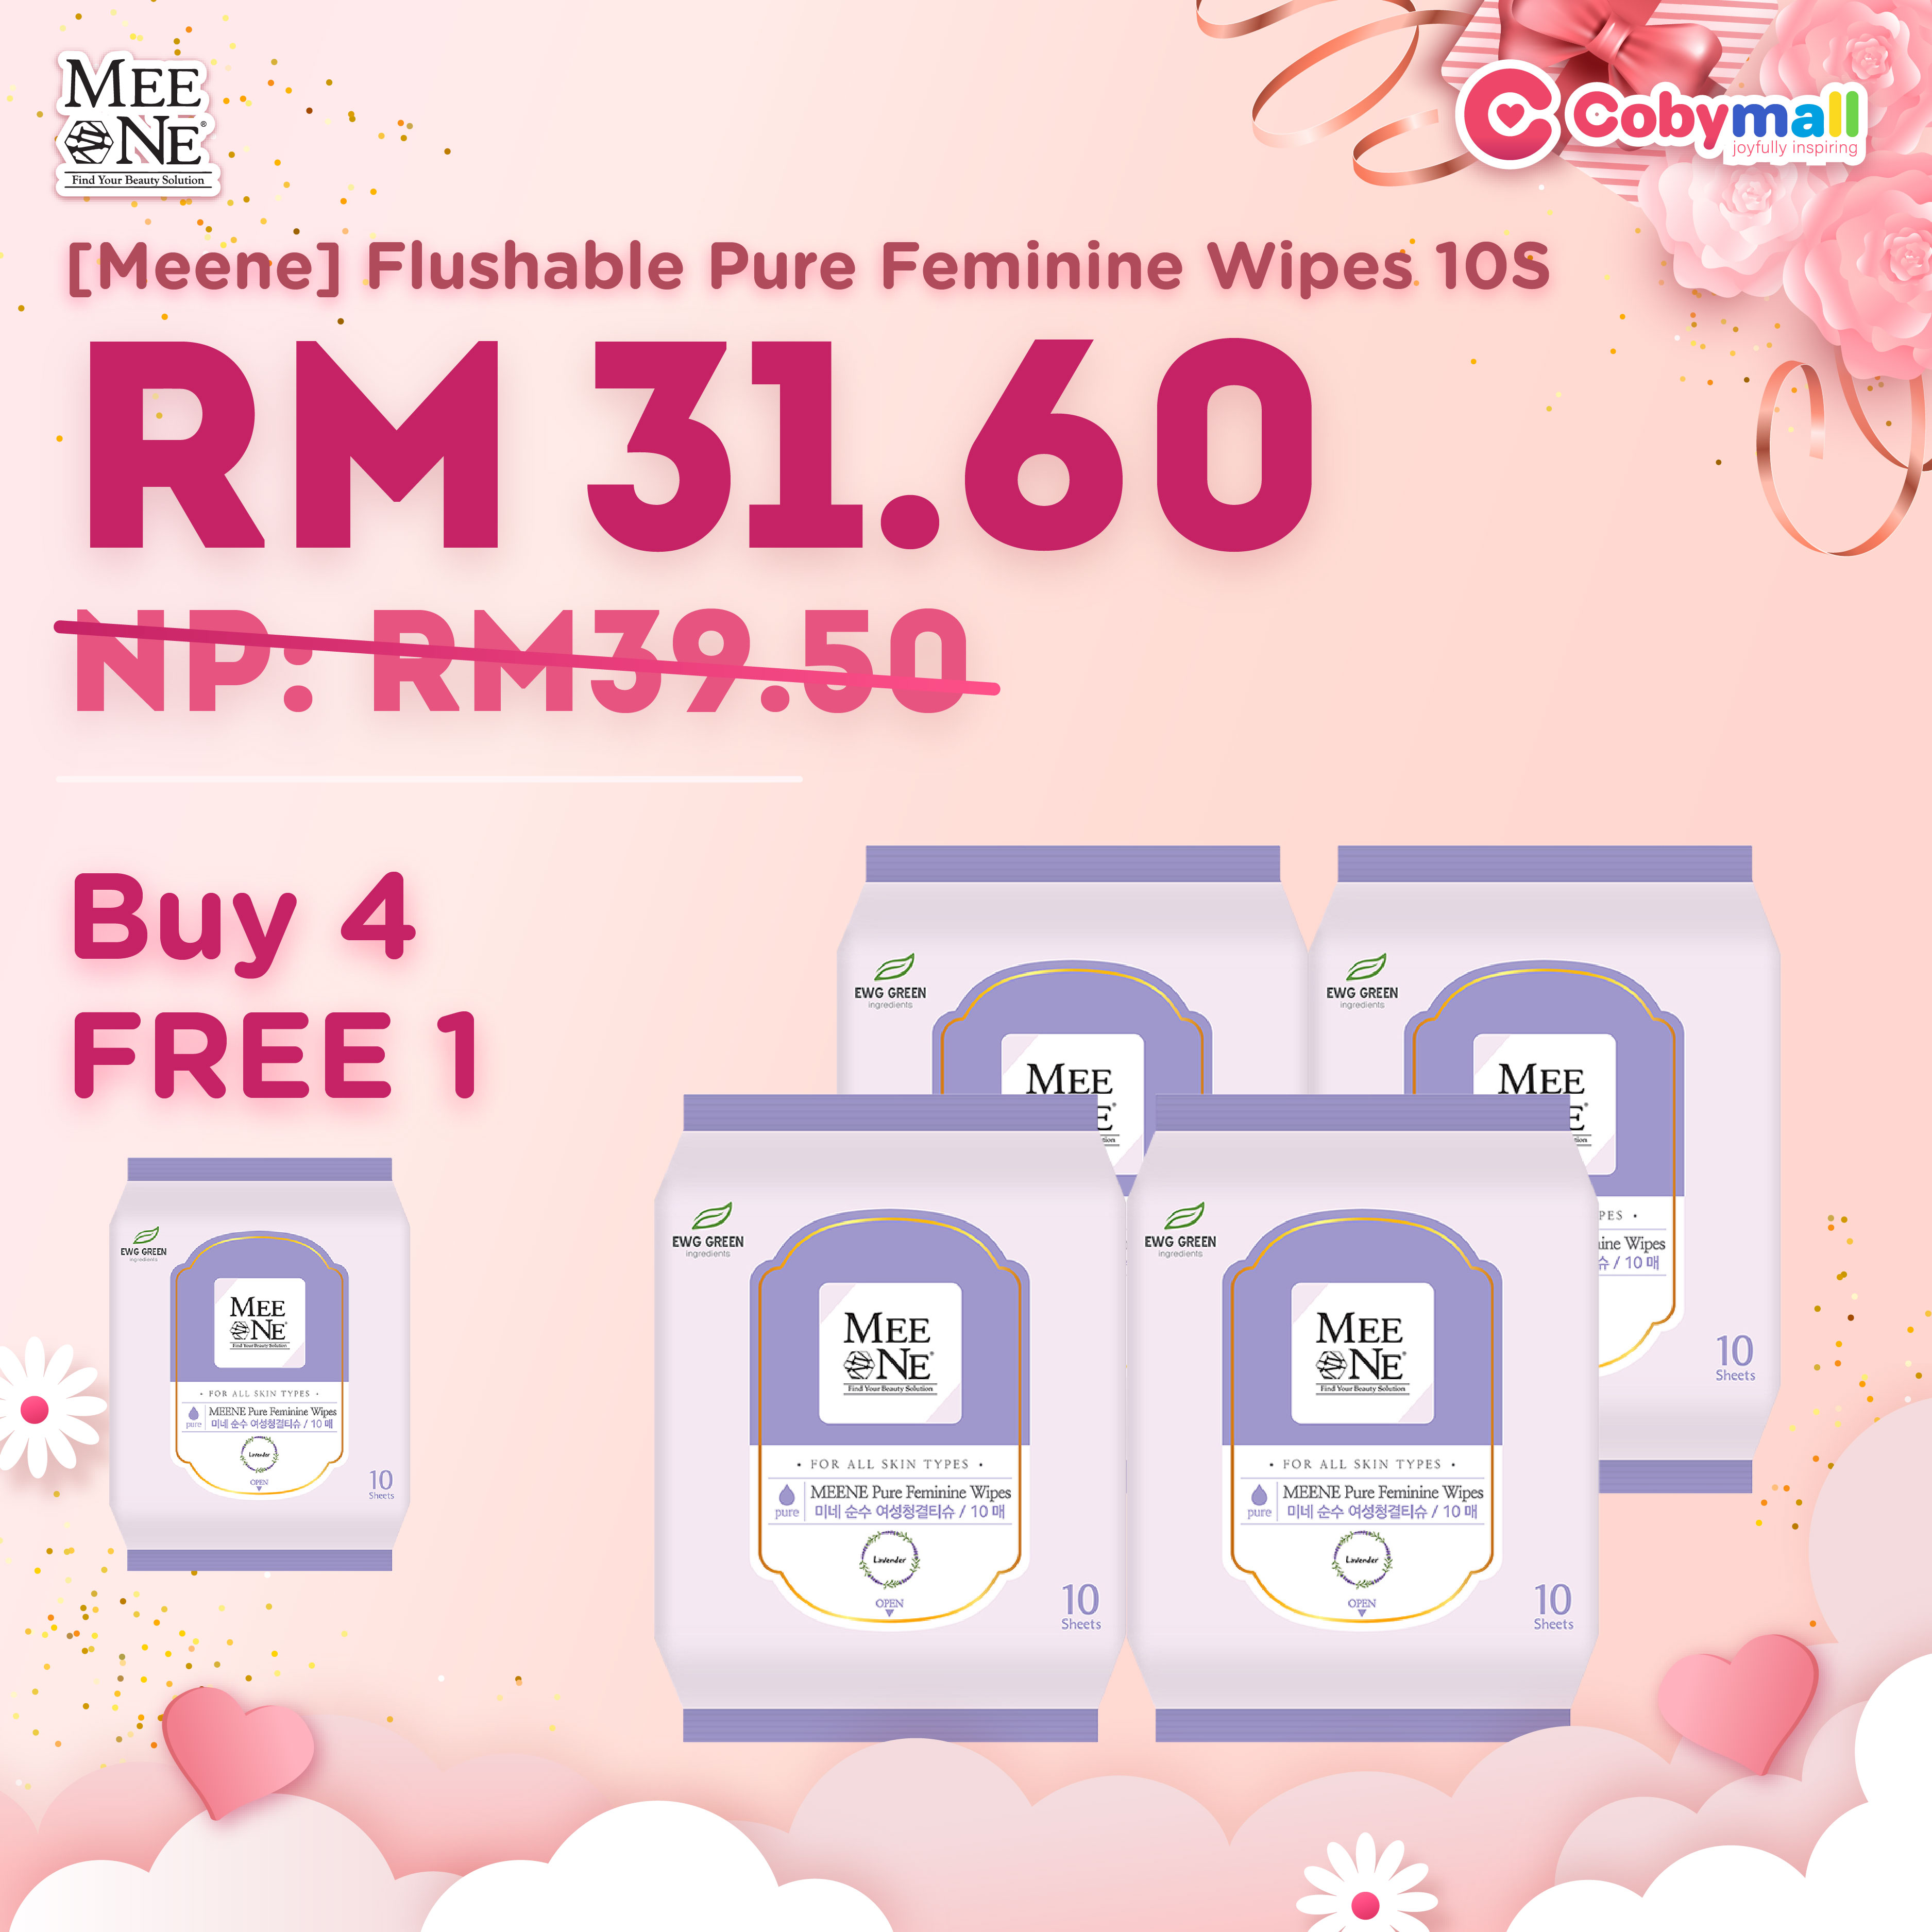 Mother's Day [Meene] Flushable Pure Feminine Wipes 10S (Buy 4 Free 1)